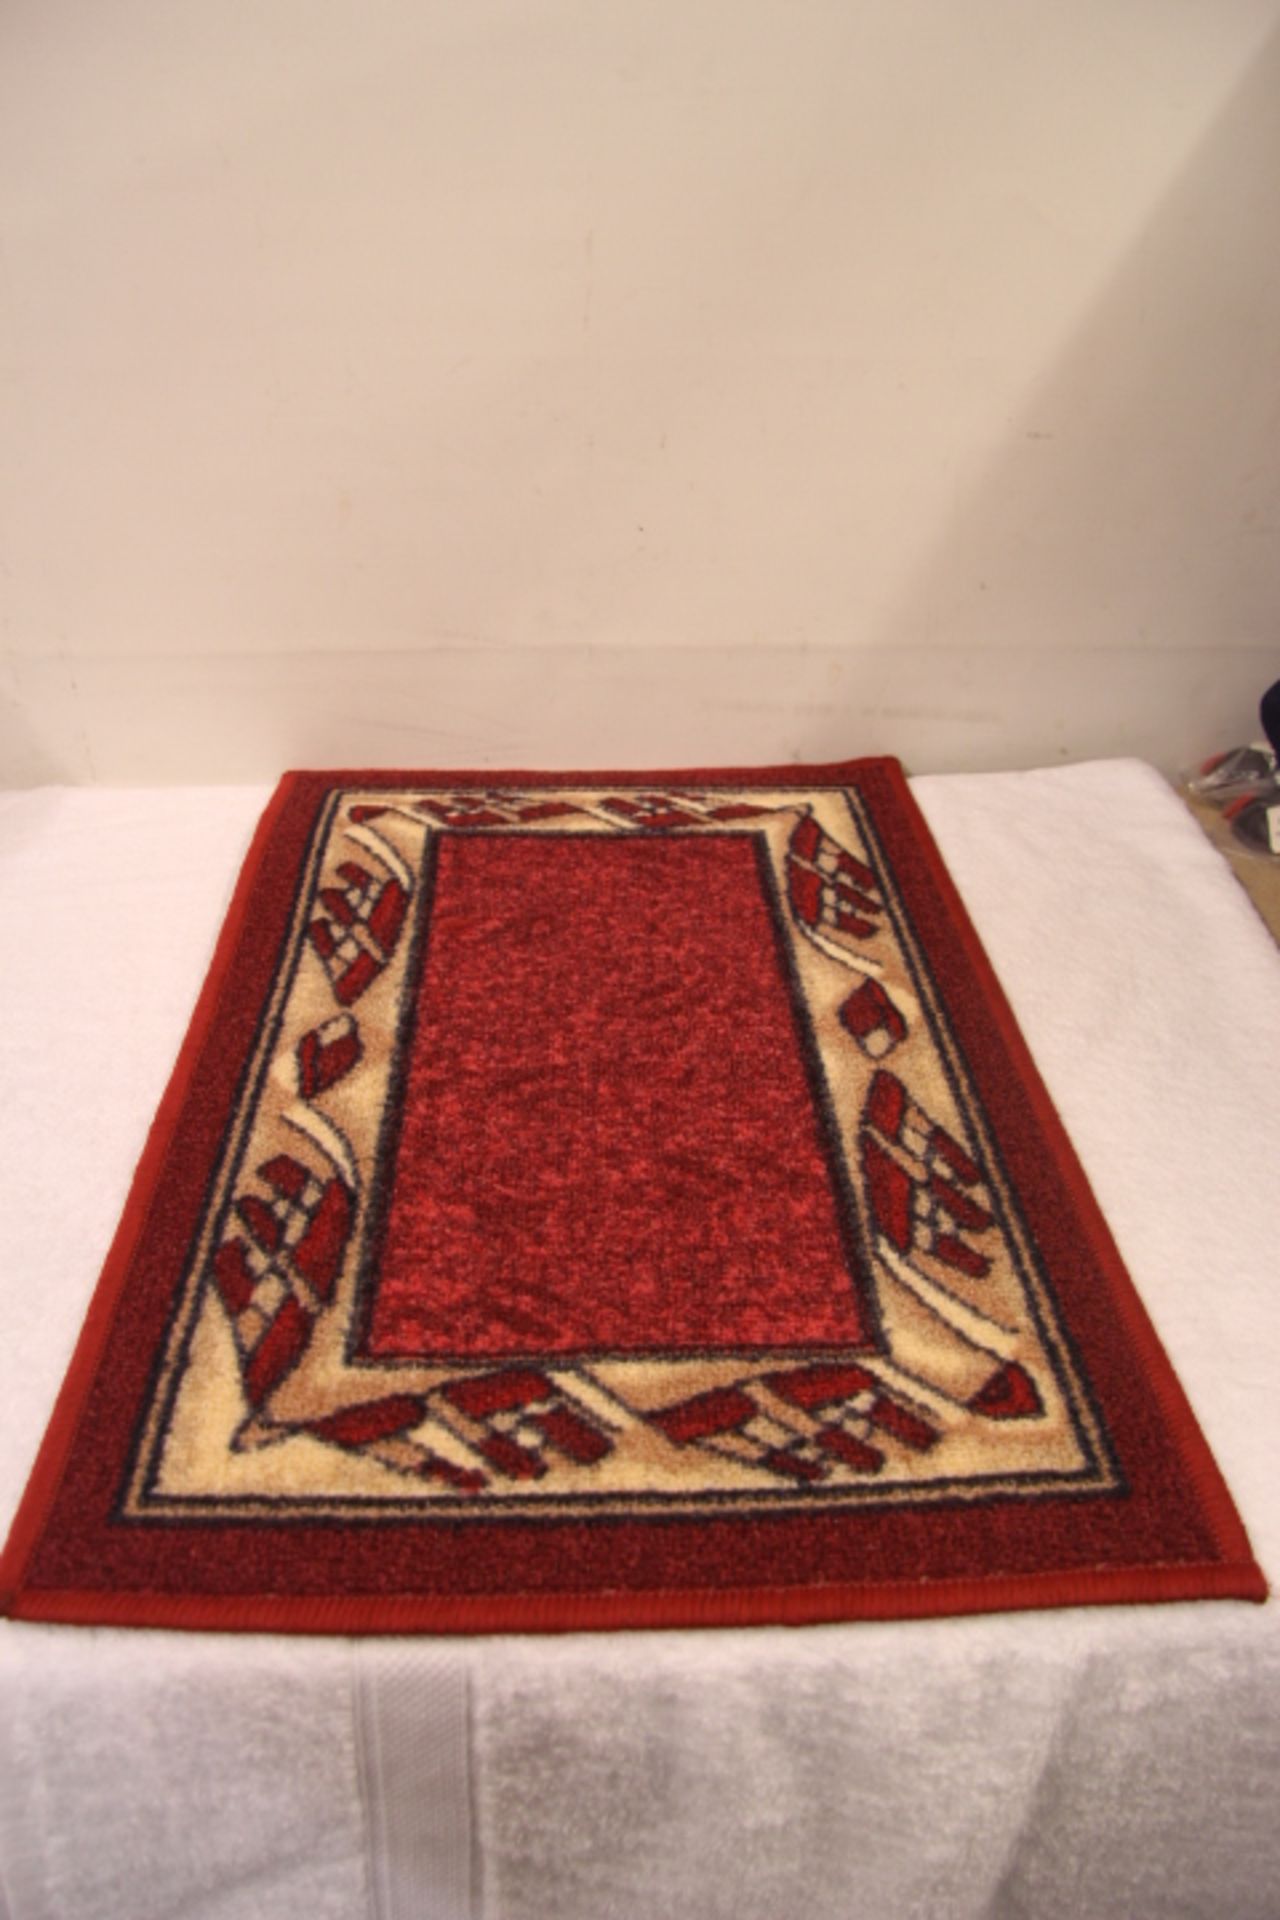 V Brand New 40 X 60cm Burgundy Decorative Door Mat X 2 YOUR BID PRICE TO BE MULTIPLIED BY TWO